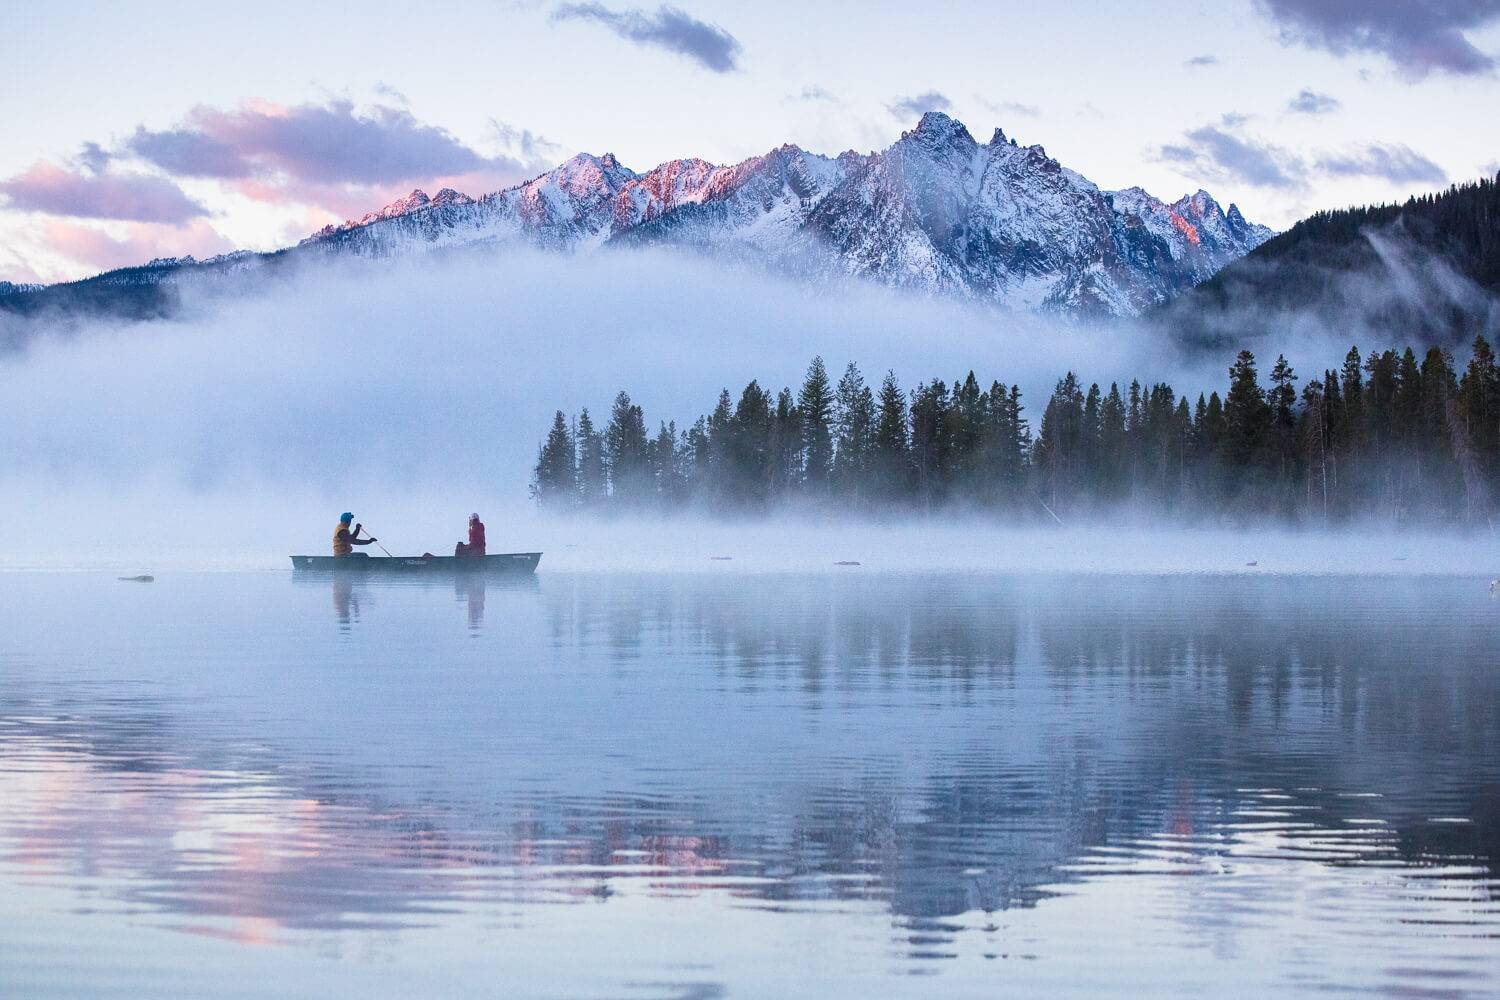 two people sit in a boat on a lake surrounded by fog with snow-capped mountains in the background